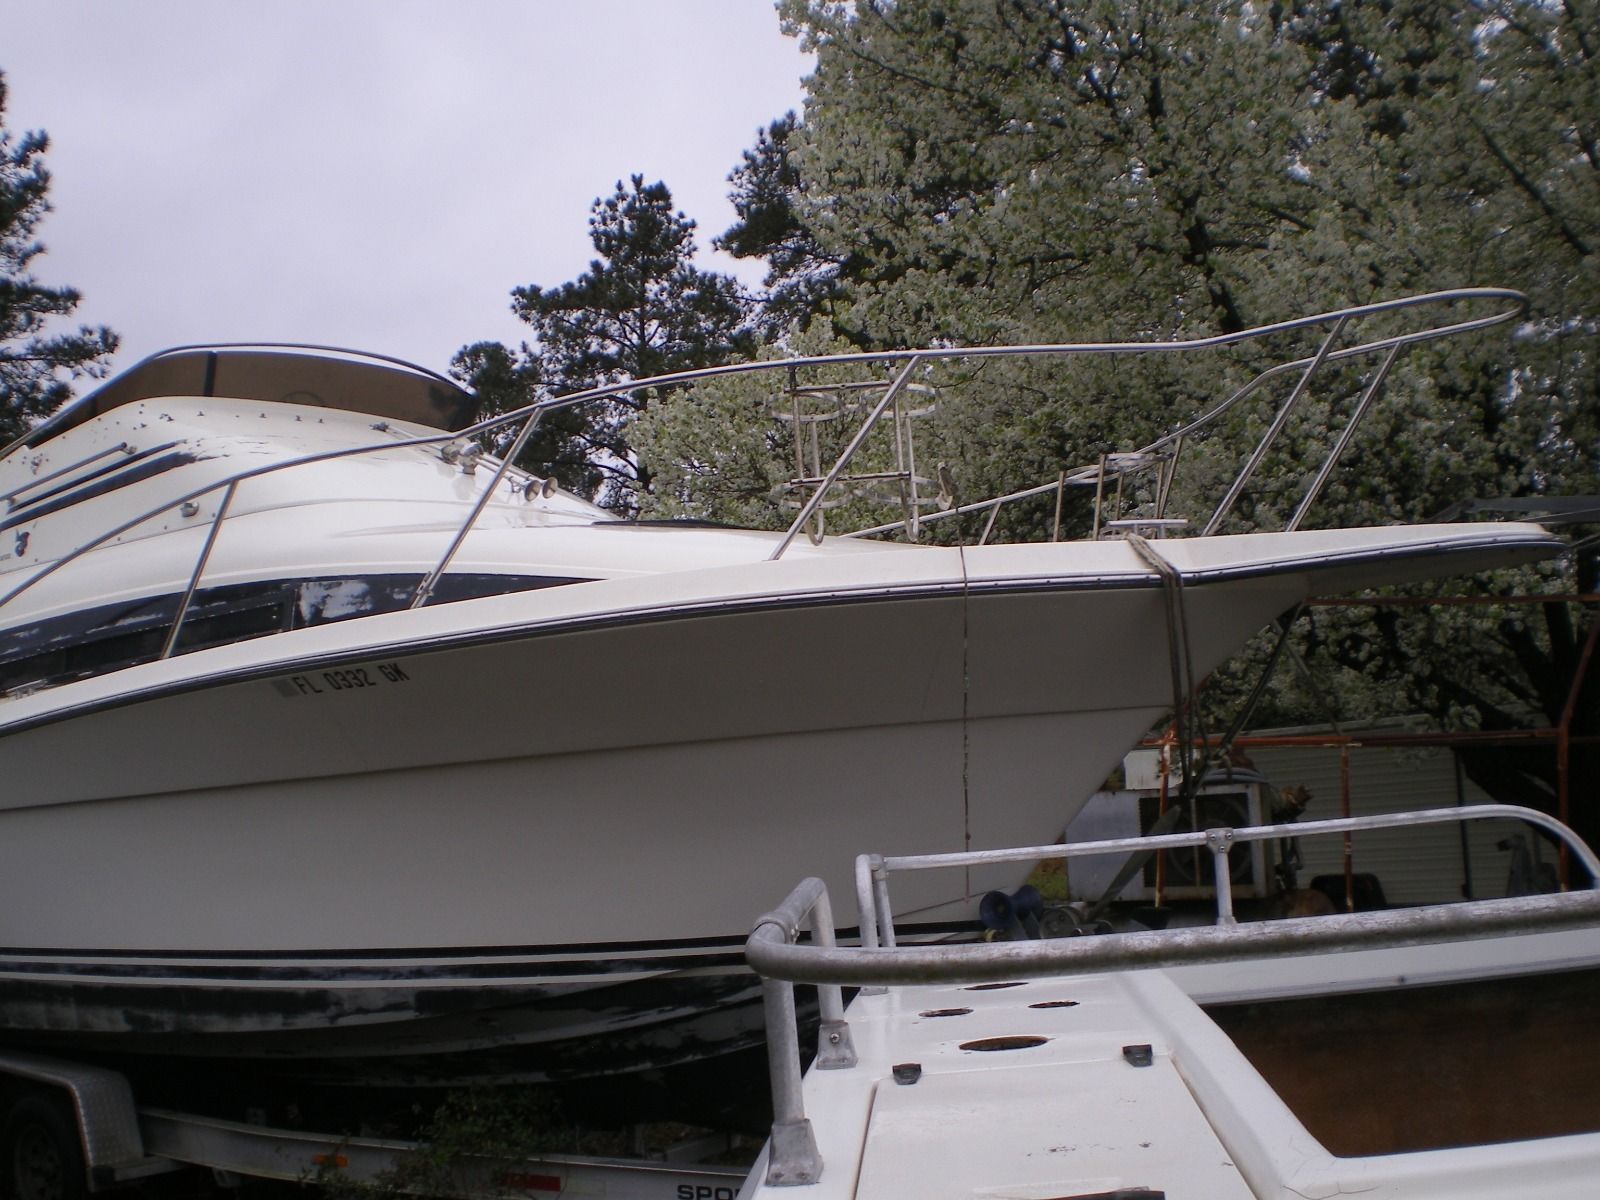 Sea Fox 29 1987 for sale for $103 - Boats-from-USA.com